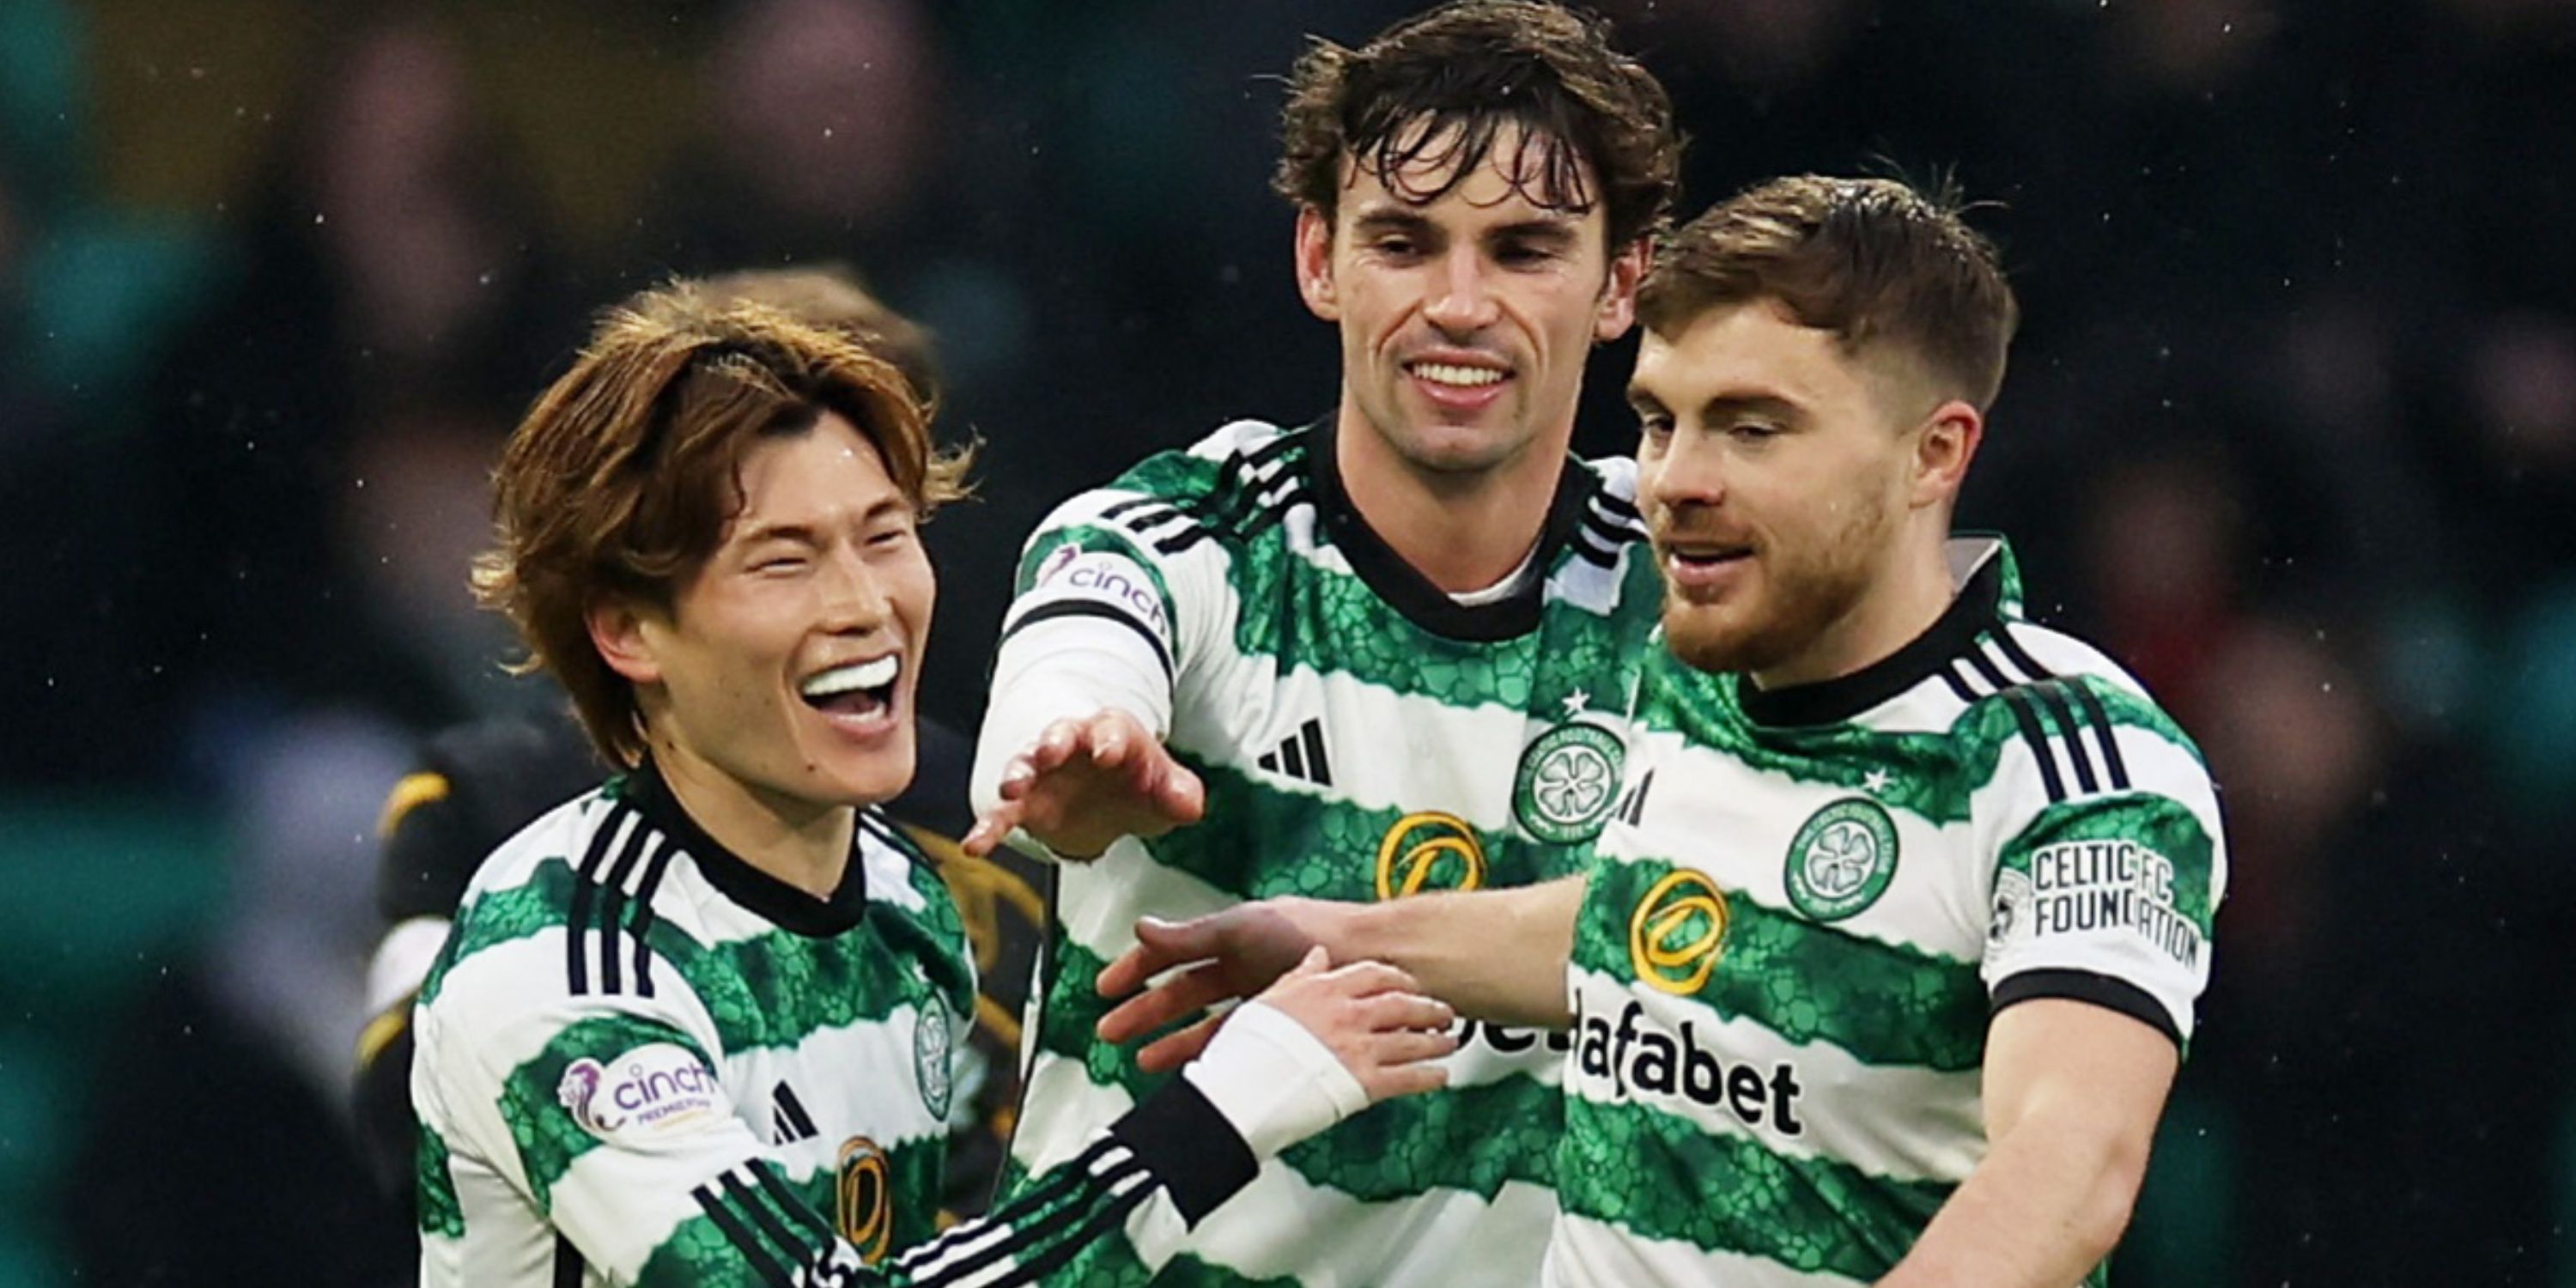 Celtic's Star Shines Bright in Dominant Display Against Hearts